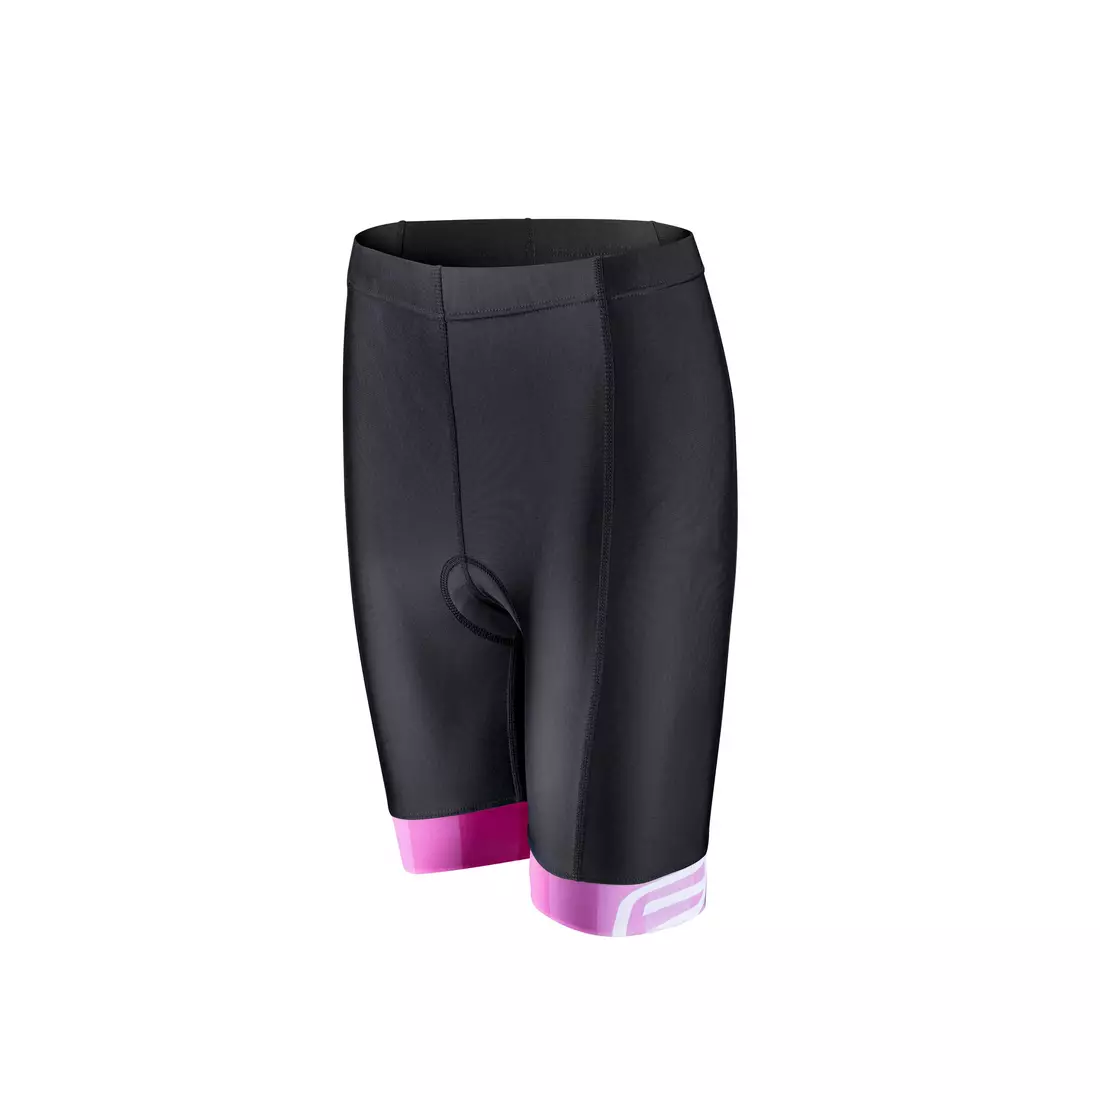 FORCE Children's cycling shorts KID VICTORY pink, 9002537-KID3